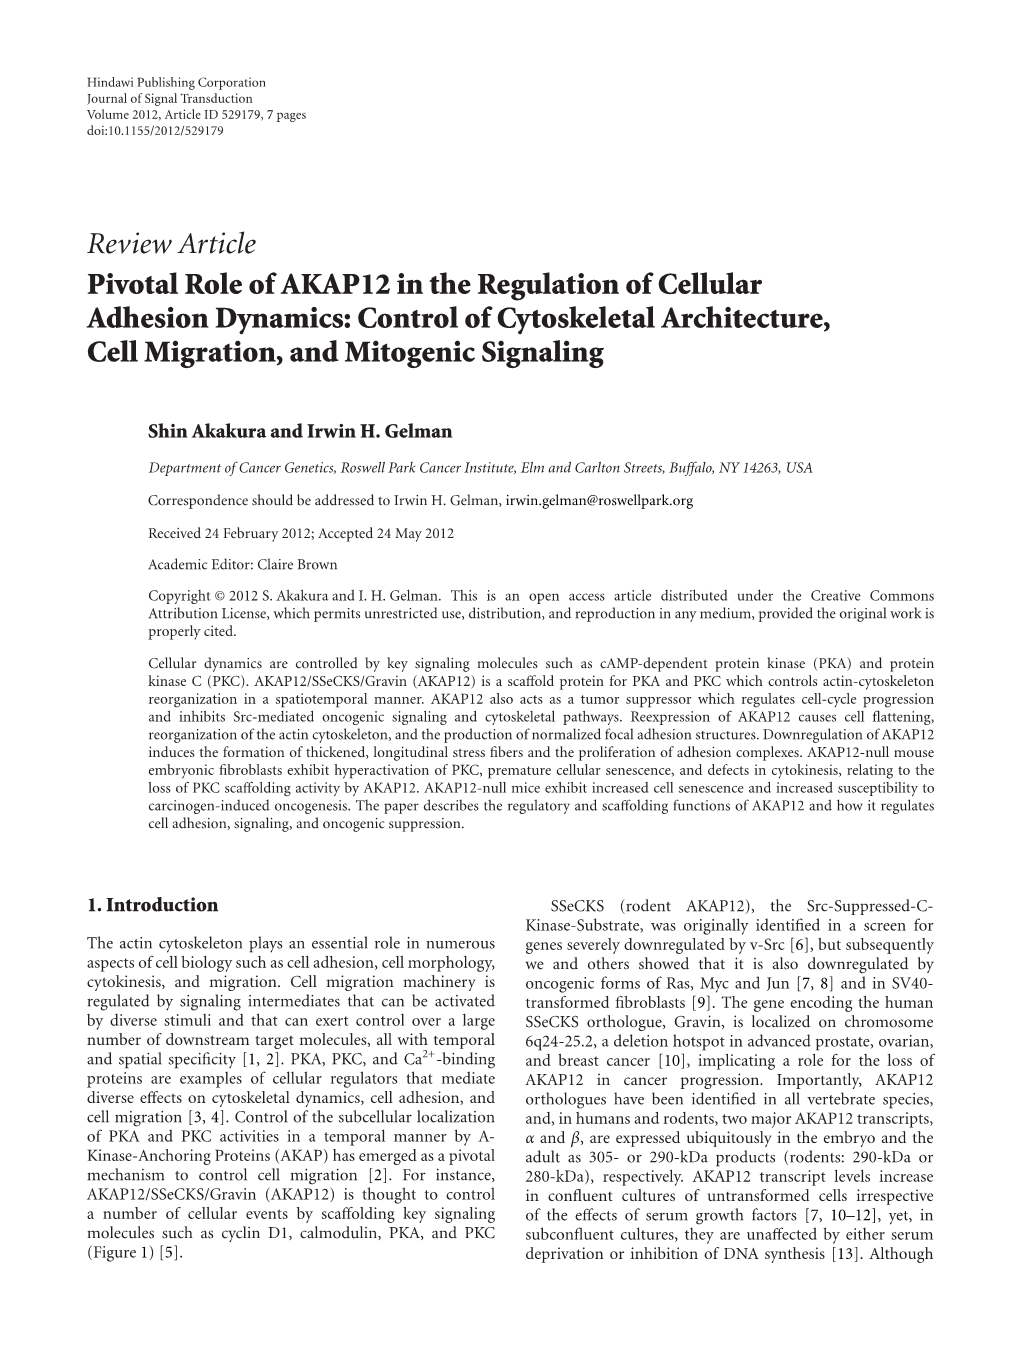 Pivotal Role of AKAP12 in the Regulation of Cellular Adhesion Dynamics: Control of Cytoskeletal Architecture, Cell Migration, and Mitogenic Signaling